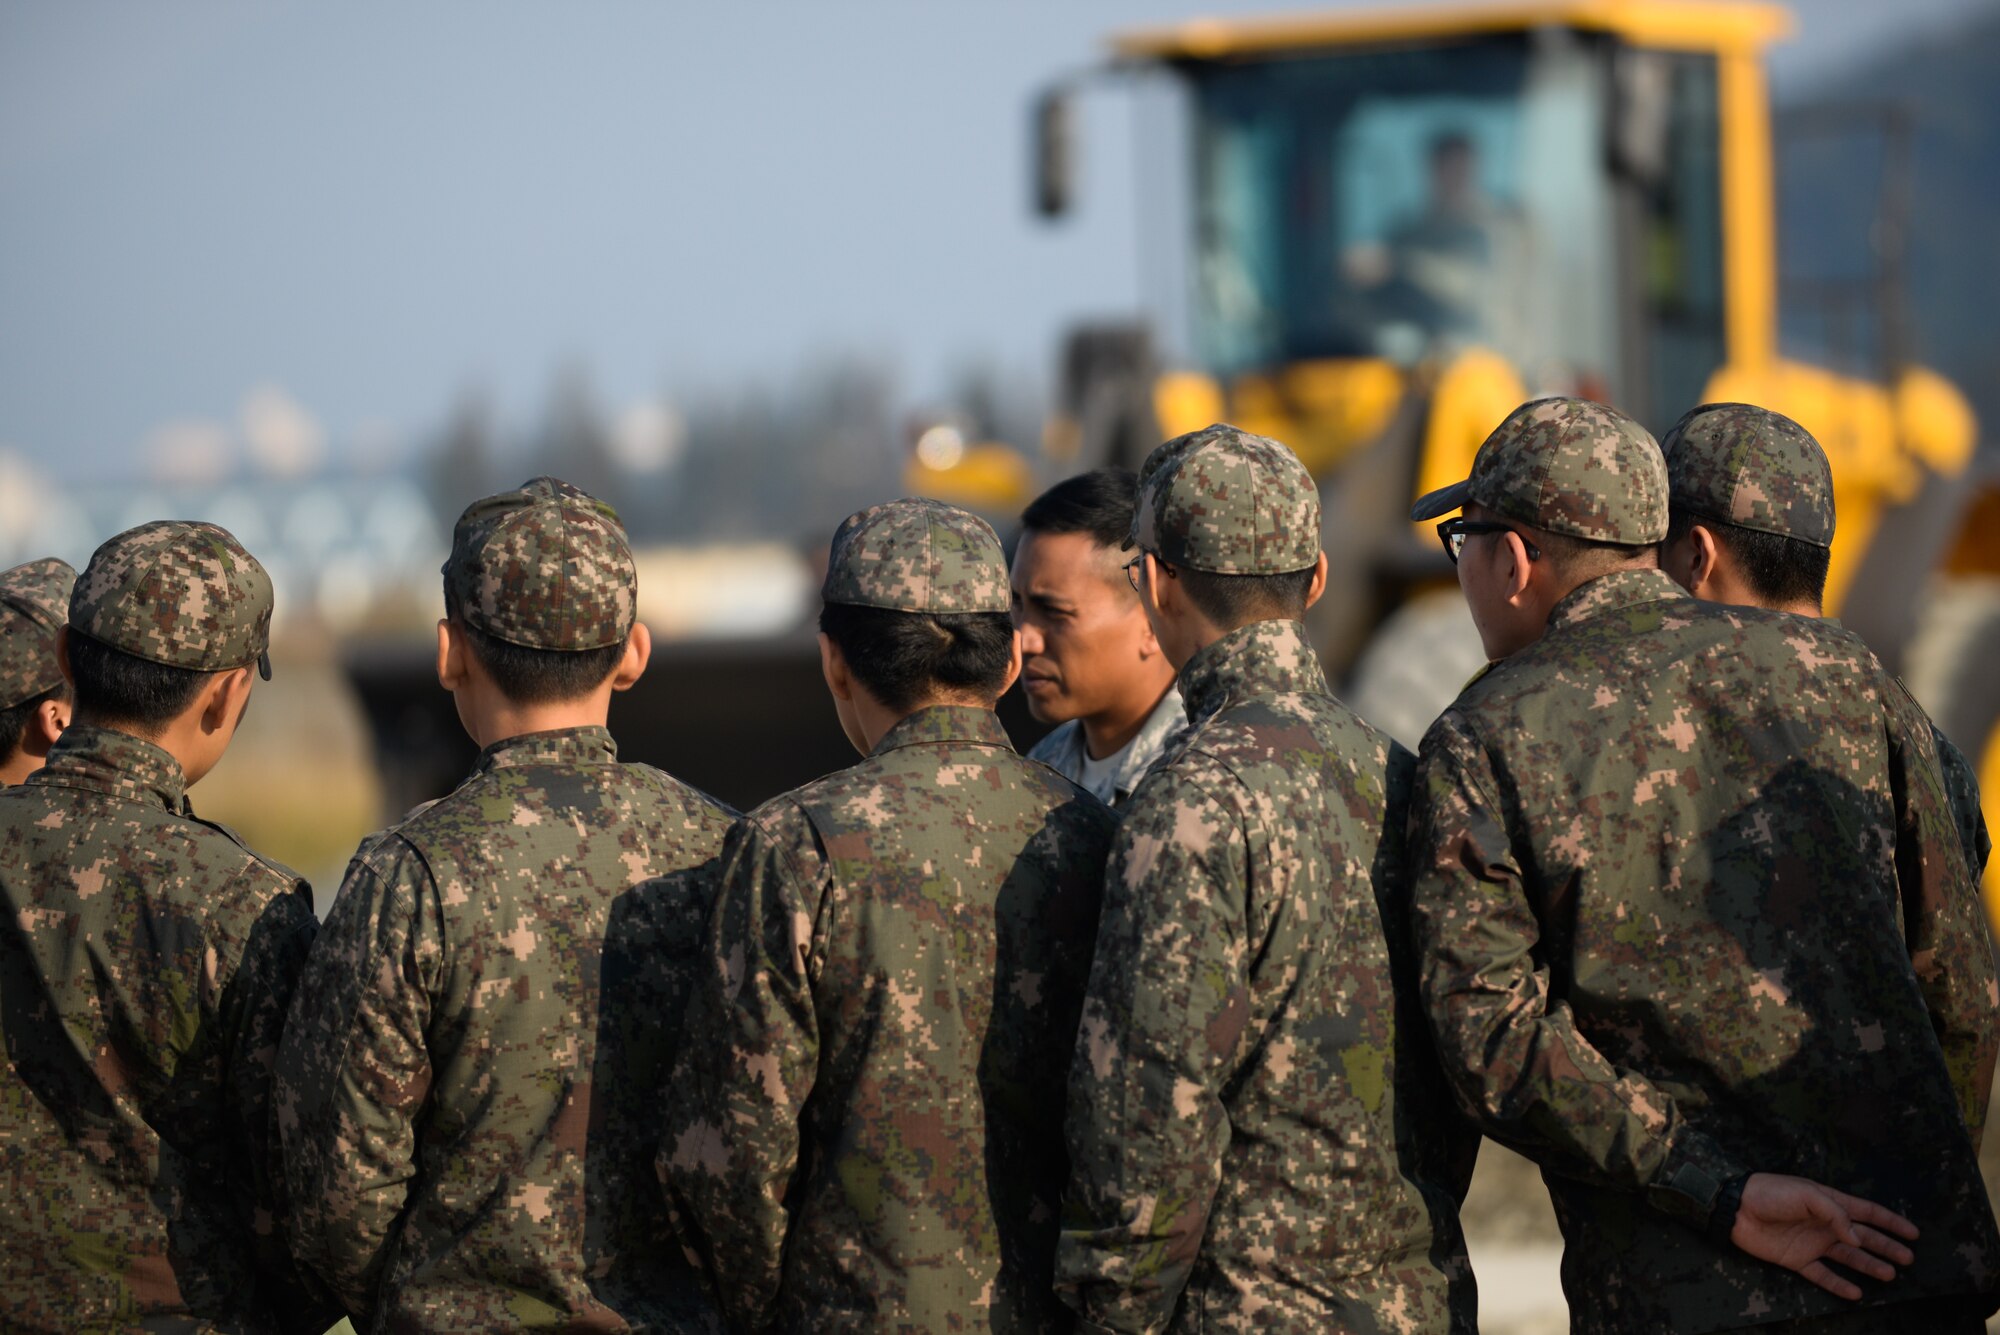 U.S. Air Force Master Sgt. Richard Loreto, Air Force Civil Engineer Center contingency instructor, explains a runway repair process to Republic of Korea Airmen during a bilateral training exercise at Gwangju Air Base, R.O.K., Nov. 6, 2017. Approximately forty U.S. Airmen from the 773d Civil Engineer Squadron at Joint Base Elmendorf-Richardson, Alaska, and 40 Republic of Korea Airmen from Gwangju trained together for a week to learn a new runway repair process for wartime contingencies. The bilateral training exercise enhanced interoperability and built partnership capacity in the Indo-Asia Pacific region. (U.S. Air Force photo by Senior Airman Curt Beach)